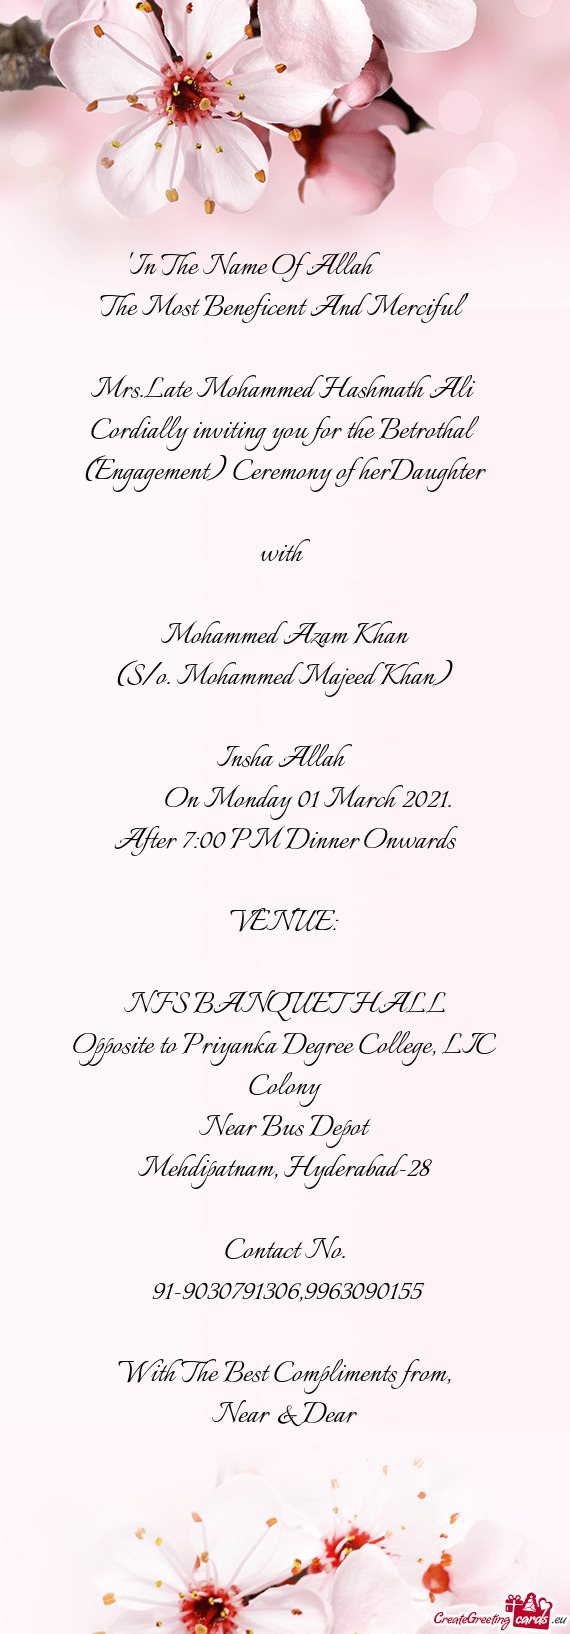 Cordially inviting you for the Betrothal (Engagement) Ceremony of herDaughter